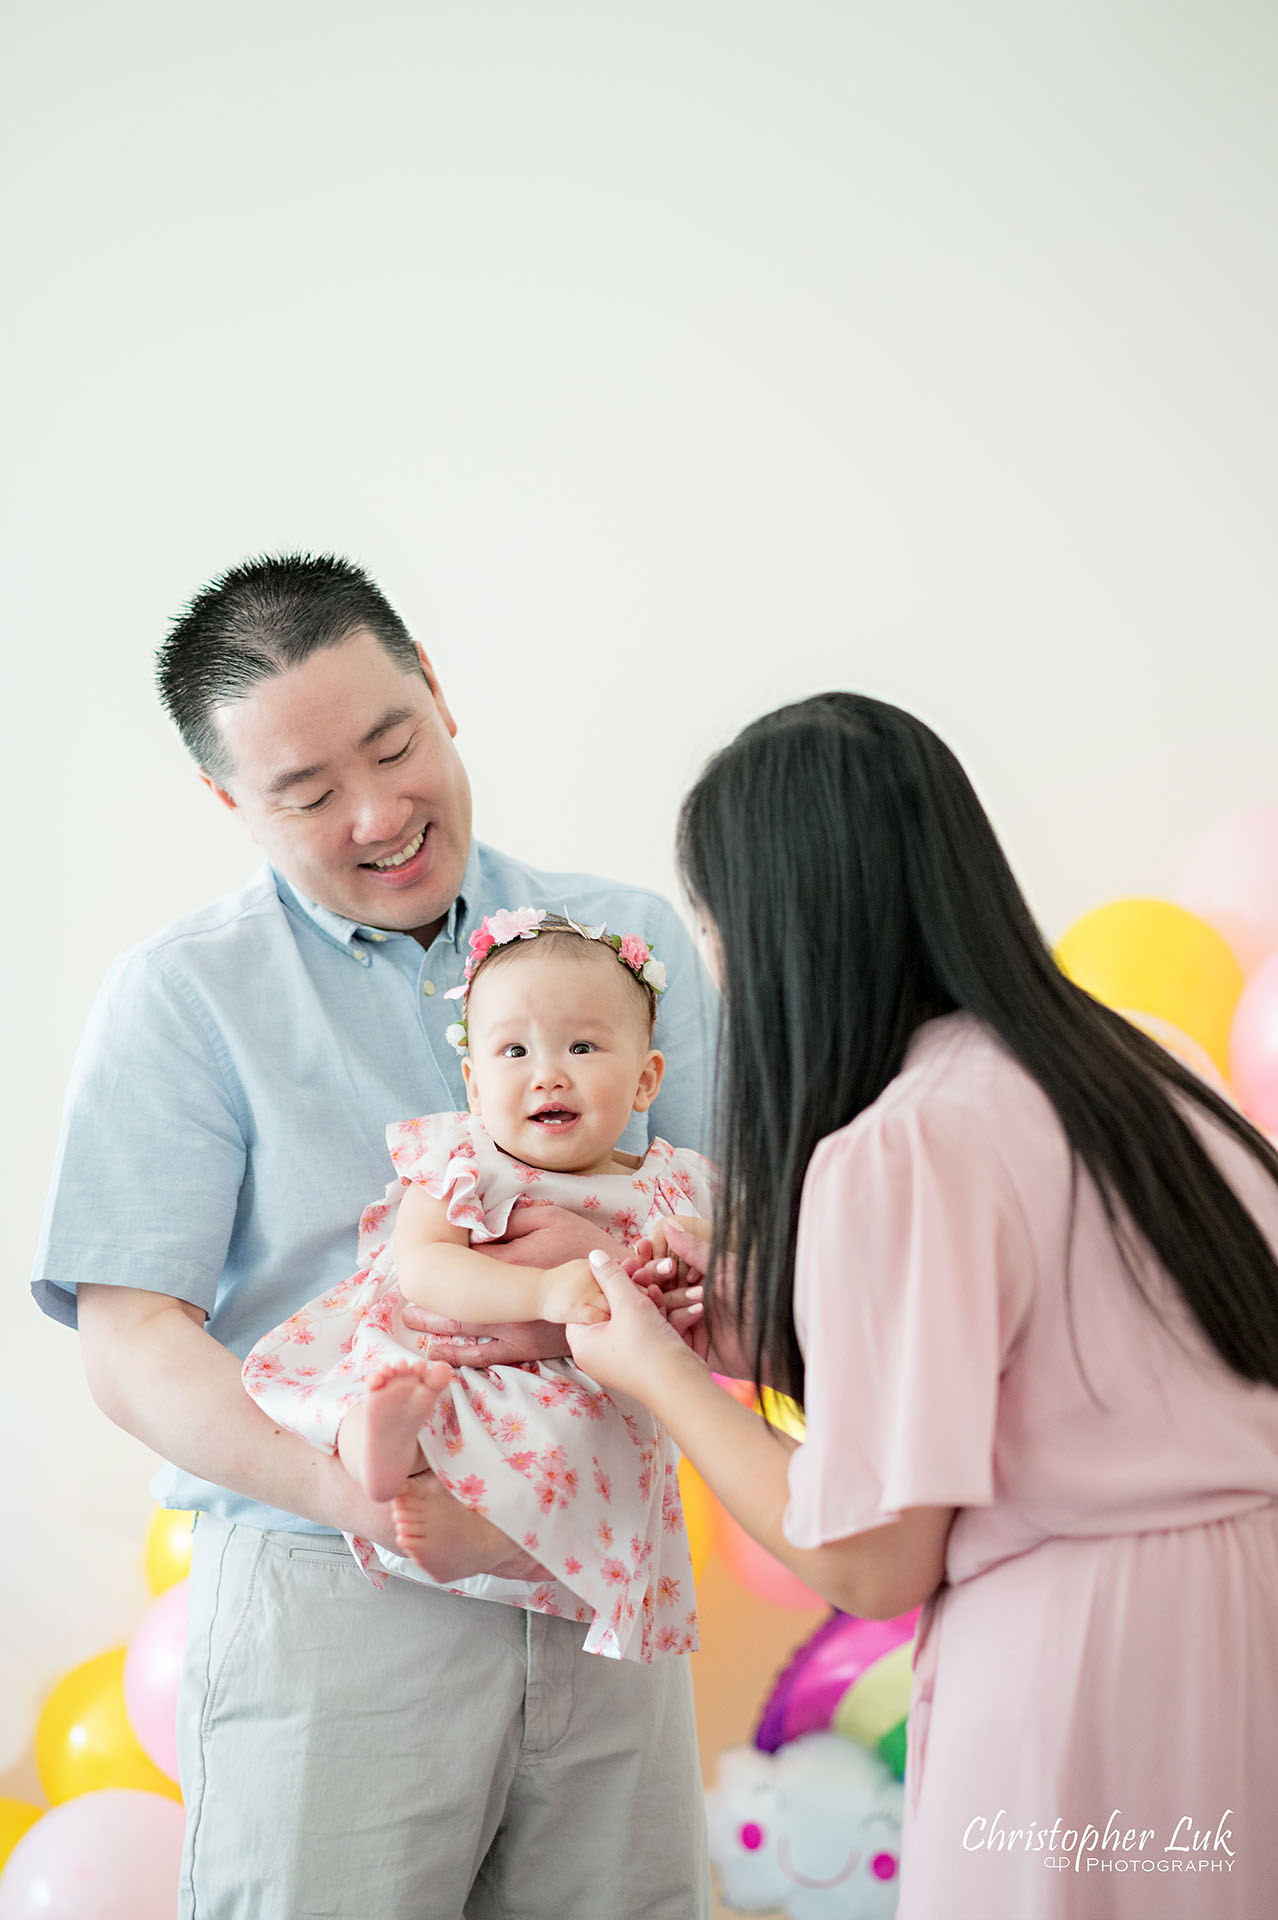 Christopher Luk Toronto Markham Family Photographer Baby Girl First Birthday Balloon Arch Rainbow Pink Sun Clouds Decor Mother Mom Daughter Motherhood Father Dad Fatherhood Hug Smile Play Together Laugh Natural Candid Photojournalistic Portrait